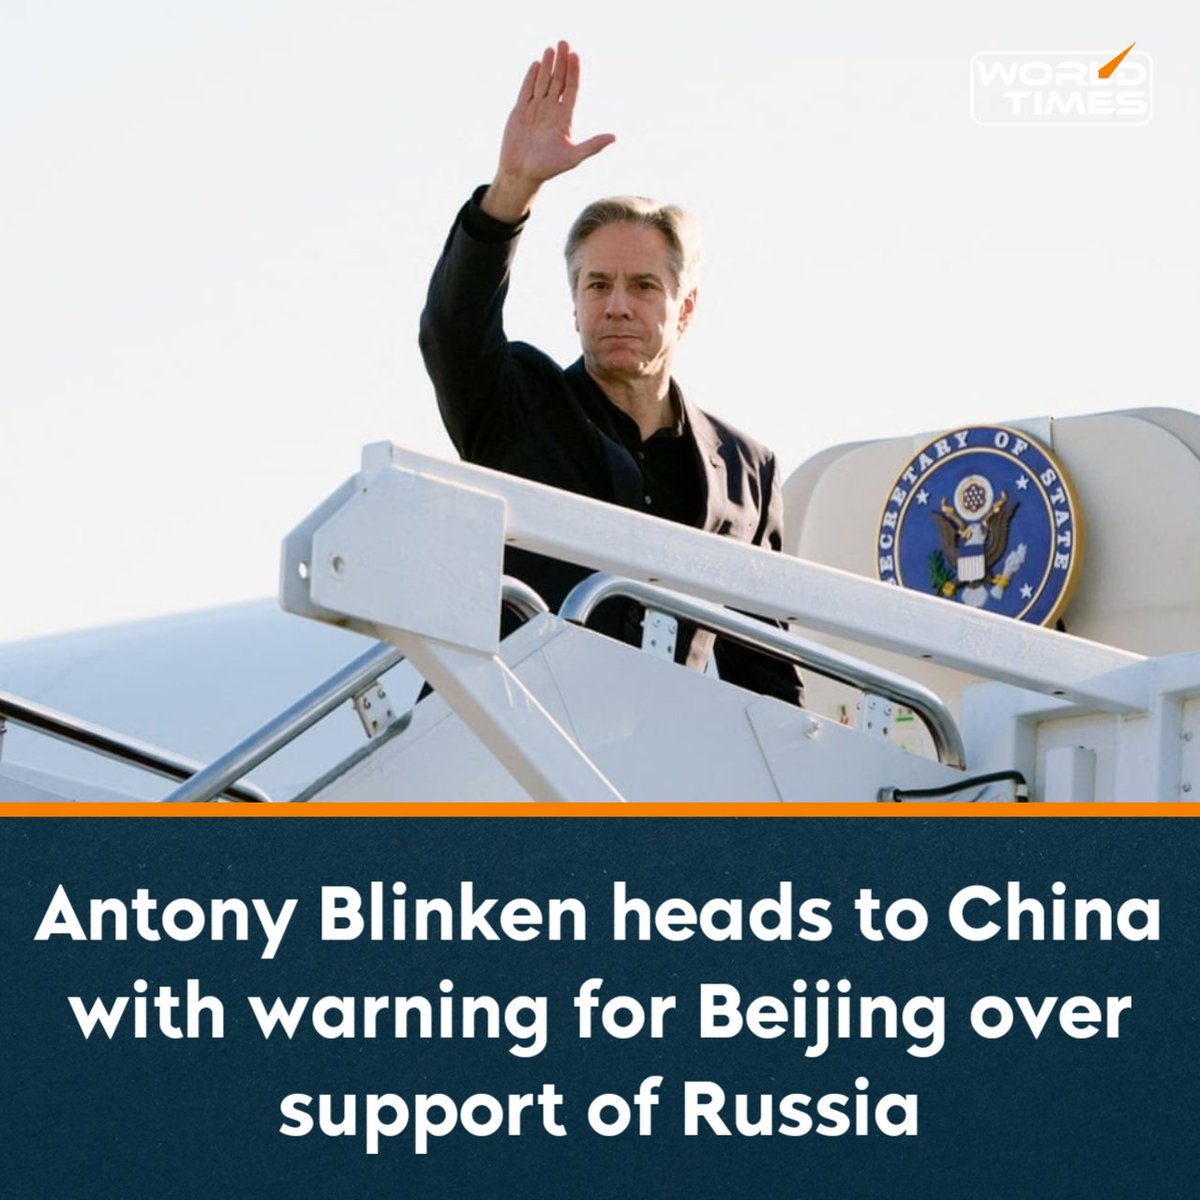 Antony Blinken was due to land in China on Wednesday, amid a worsening rift between the world’s two most powerful countries that threatens to overshadow otherwise improving relations. The US secretary of state is coming with a warning that the US and its European allies are no